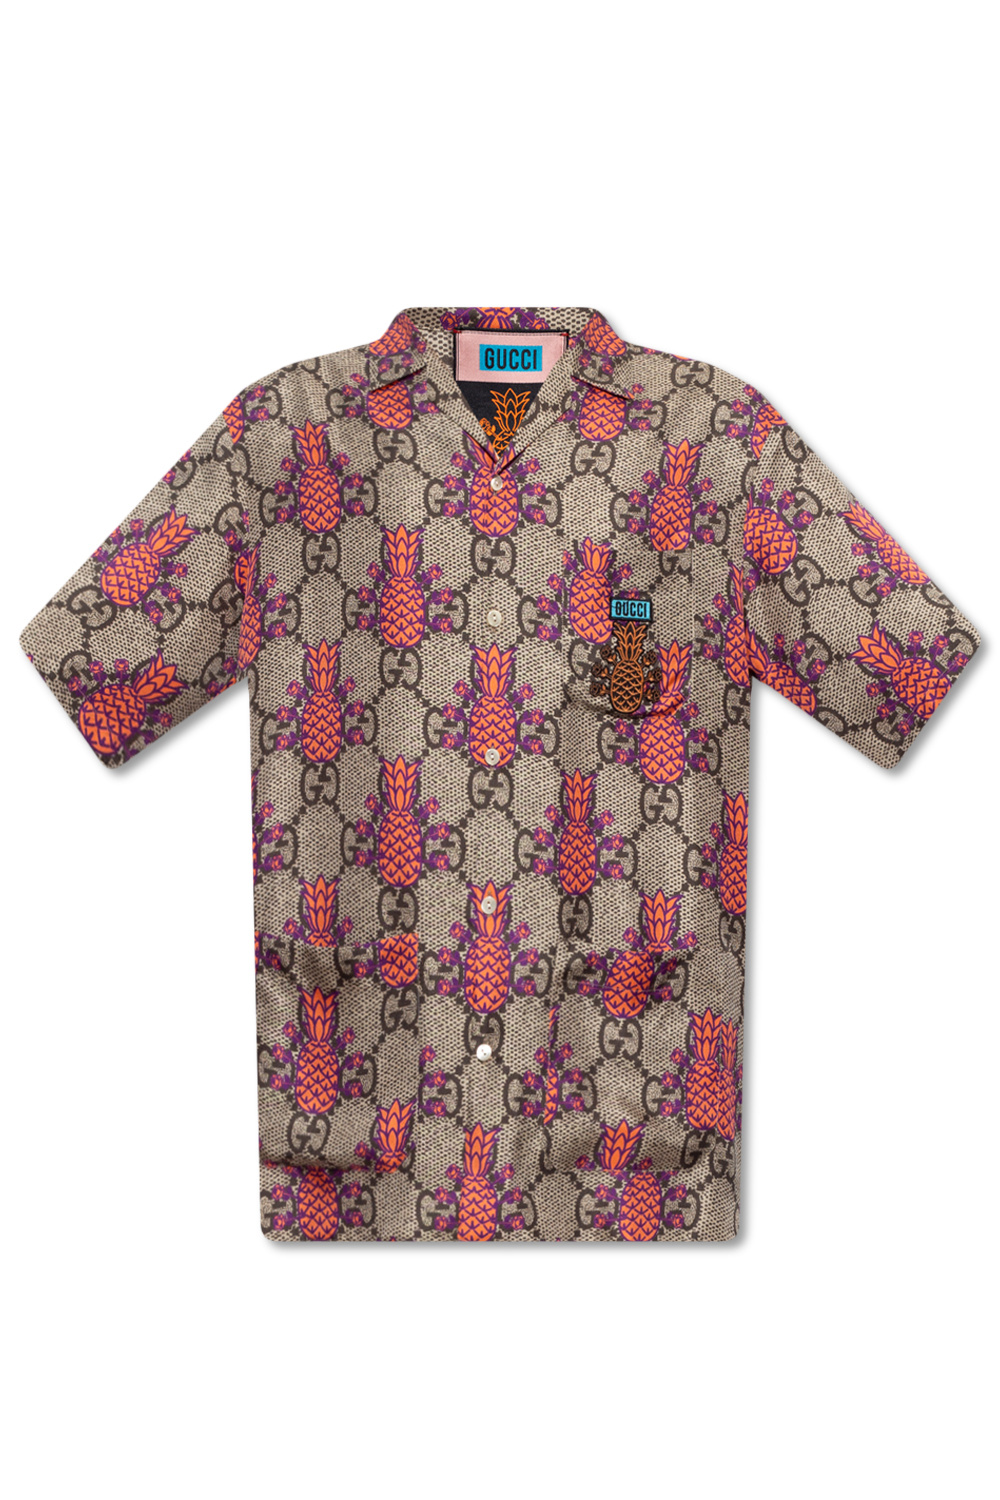 IetpShops Bolivia - sleeved shirt Gucci - The 'Gucci Pineapple' collection  short - Gucci KOBIETY BUTY NA OBCASIE